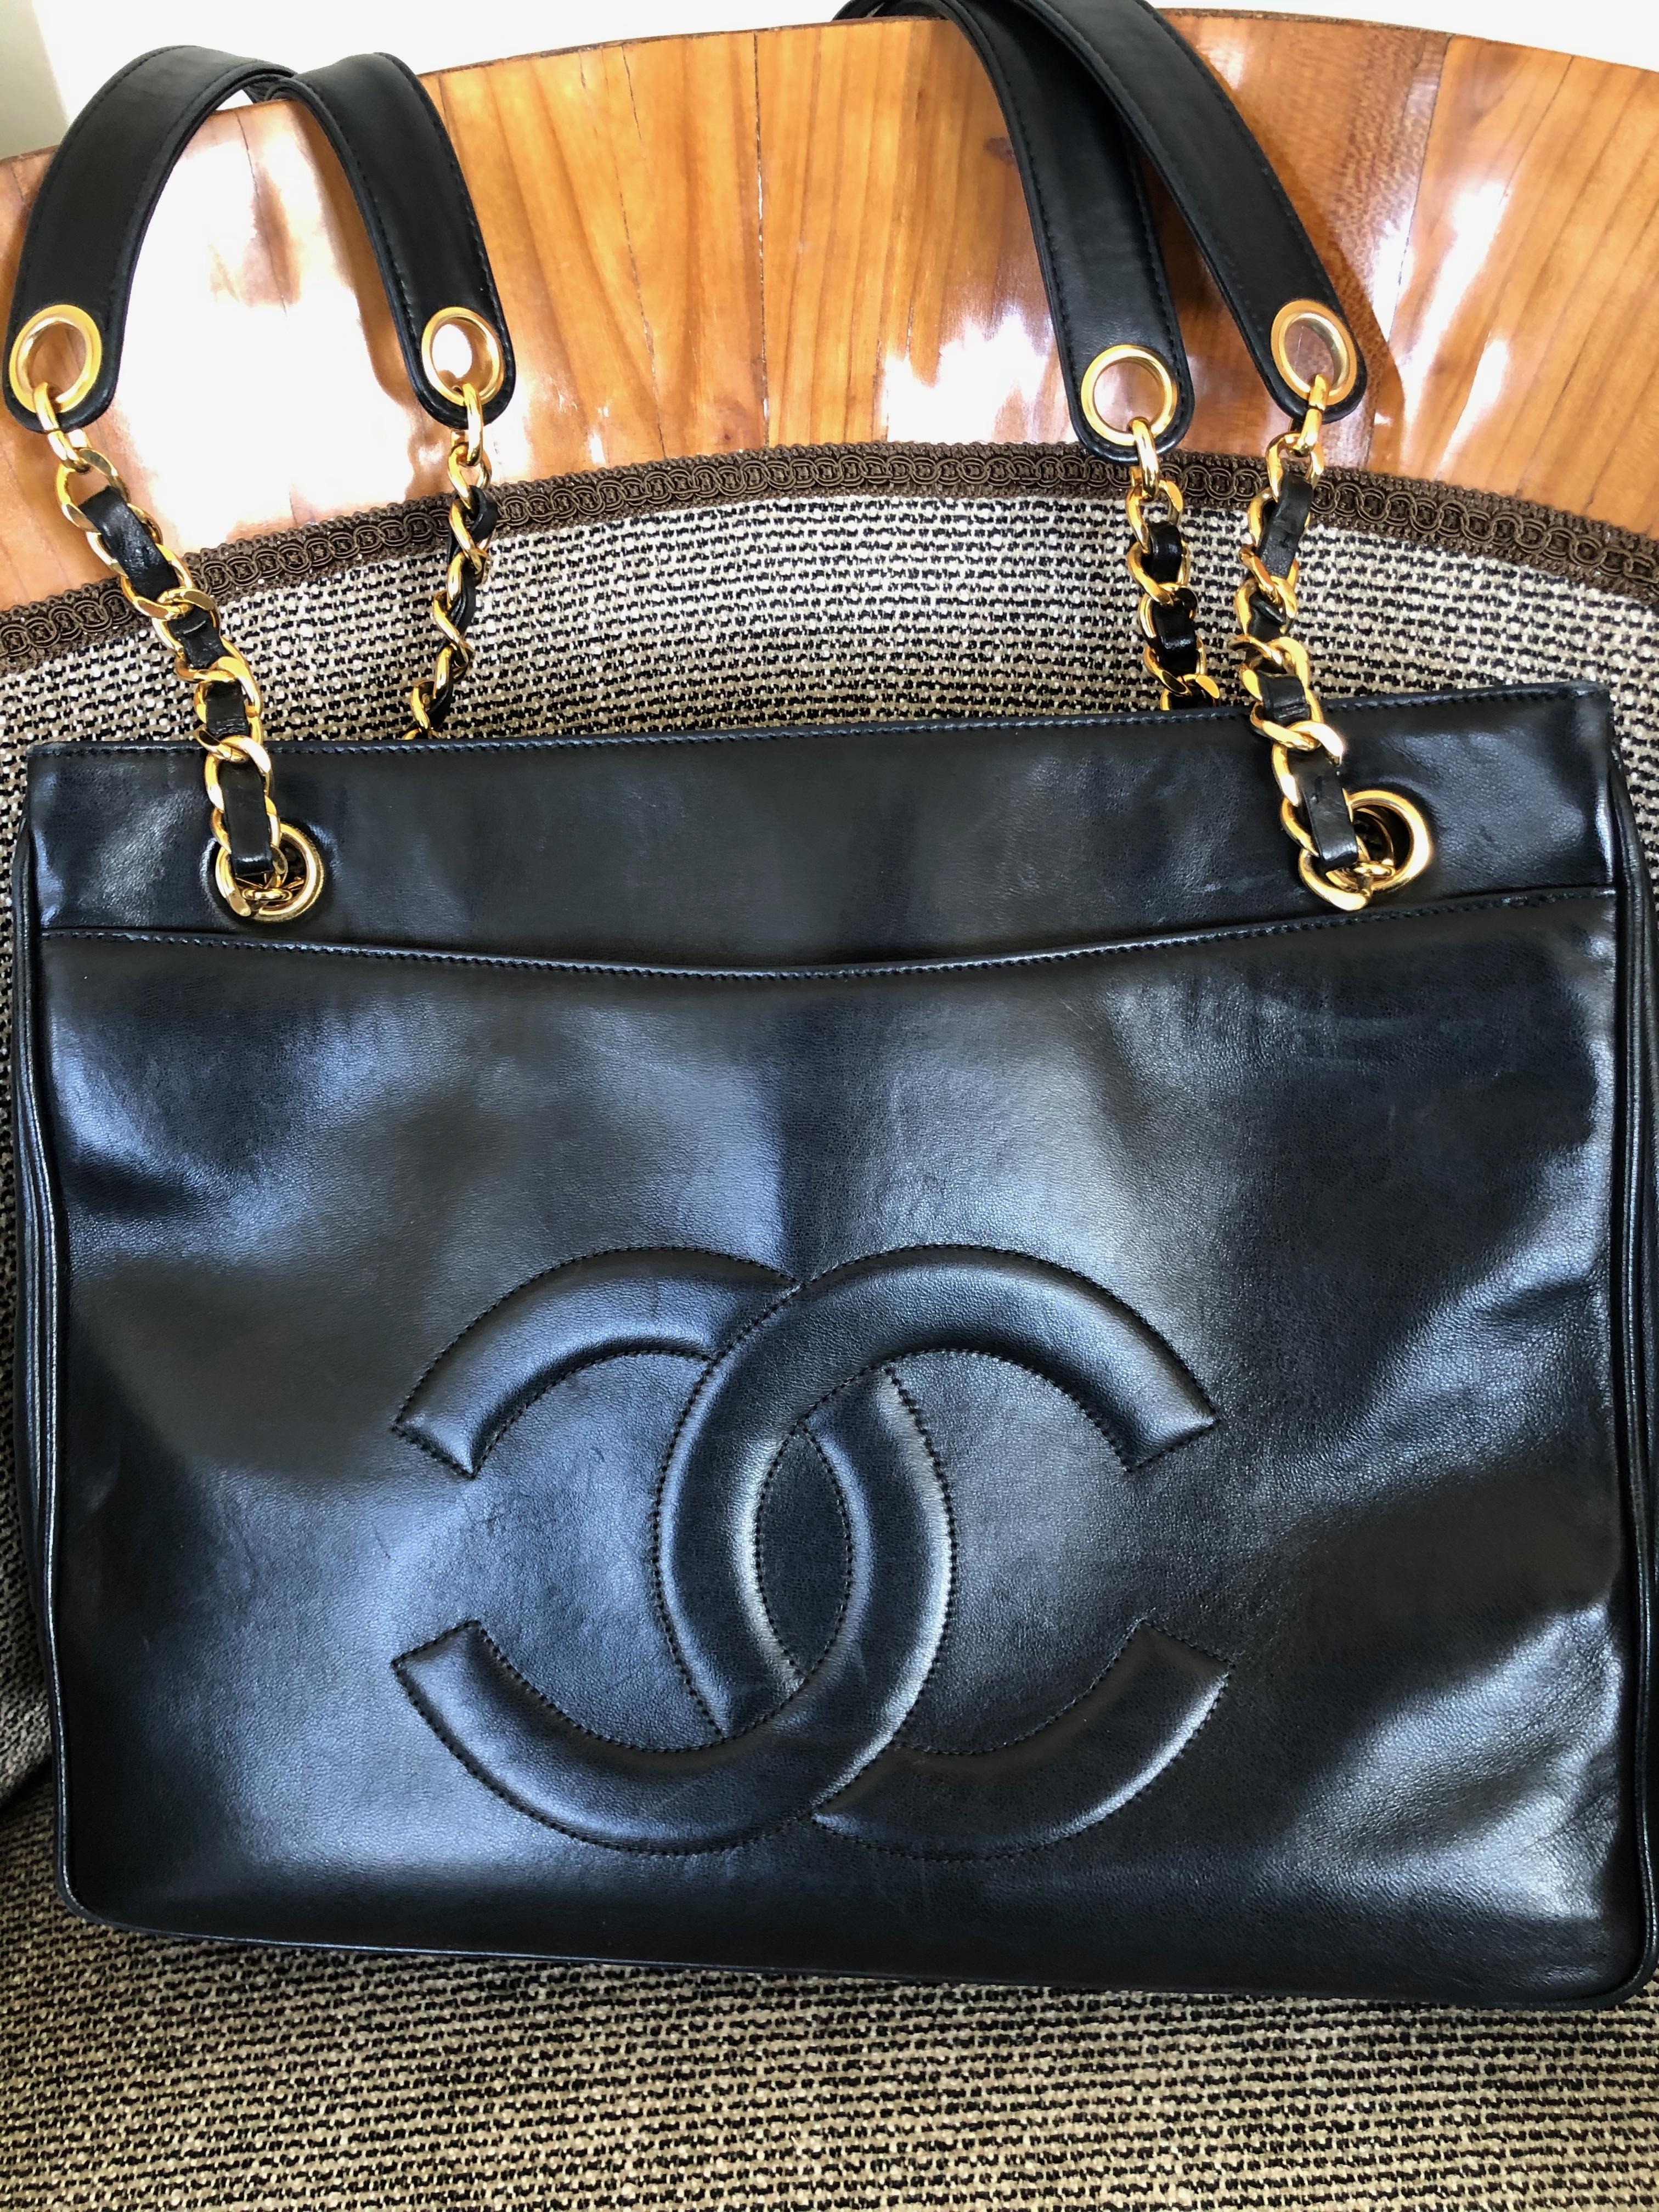 Chanel Large Vintage Black Leather Shopping Bag w Large CC Logo & Gold Hardware In Excellent Condition For Sale In Cloverdale, CA